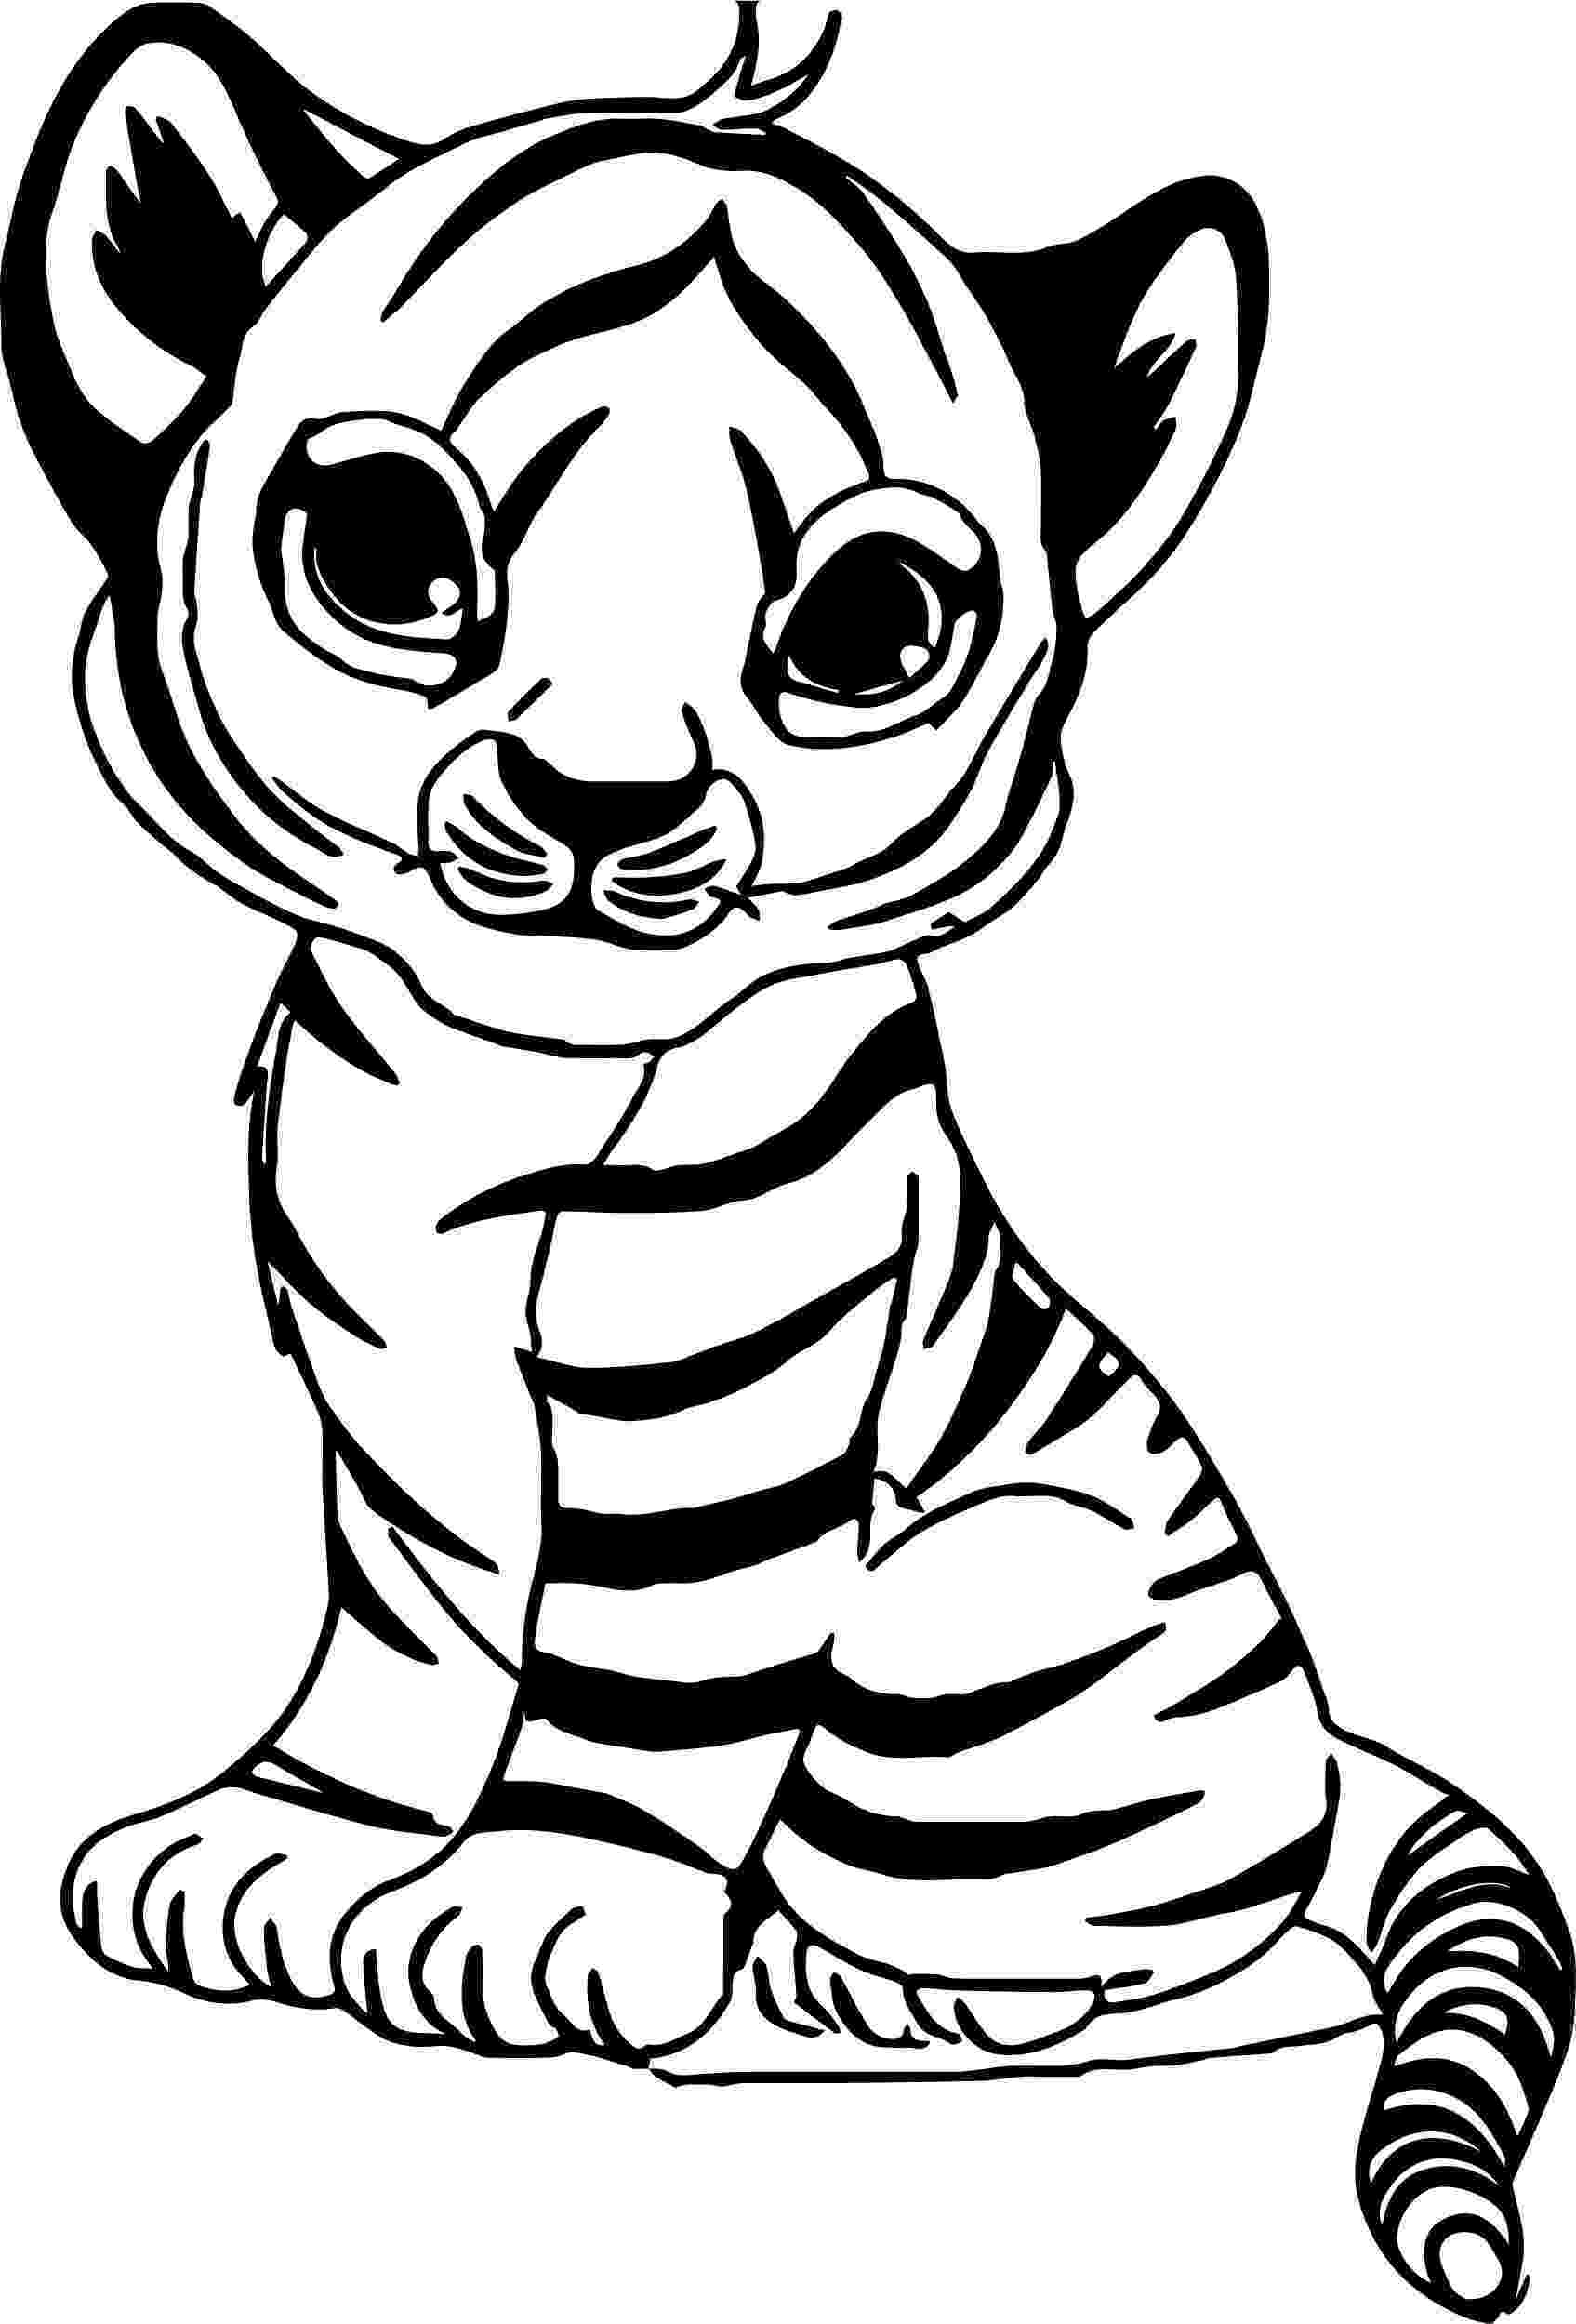 printable tiger pictures tigers to download tigers kids coloring pages tiger printable pictures 